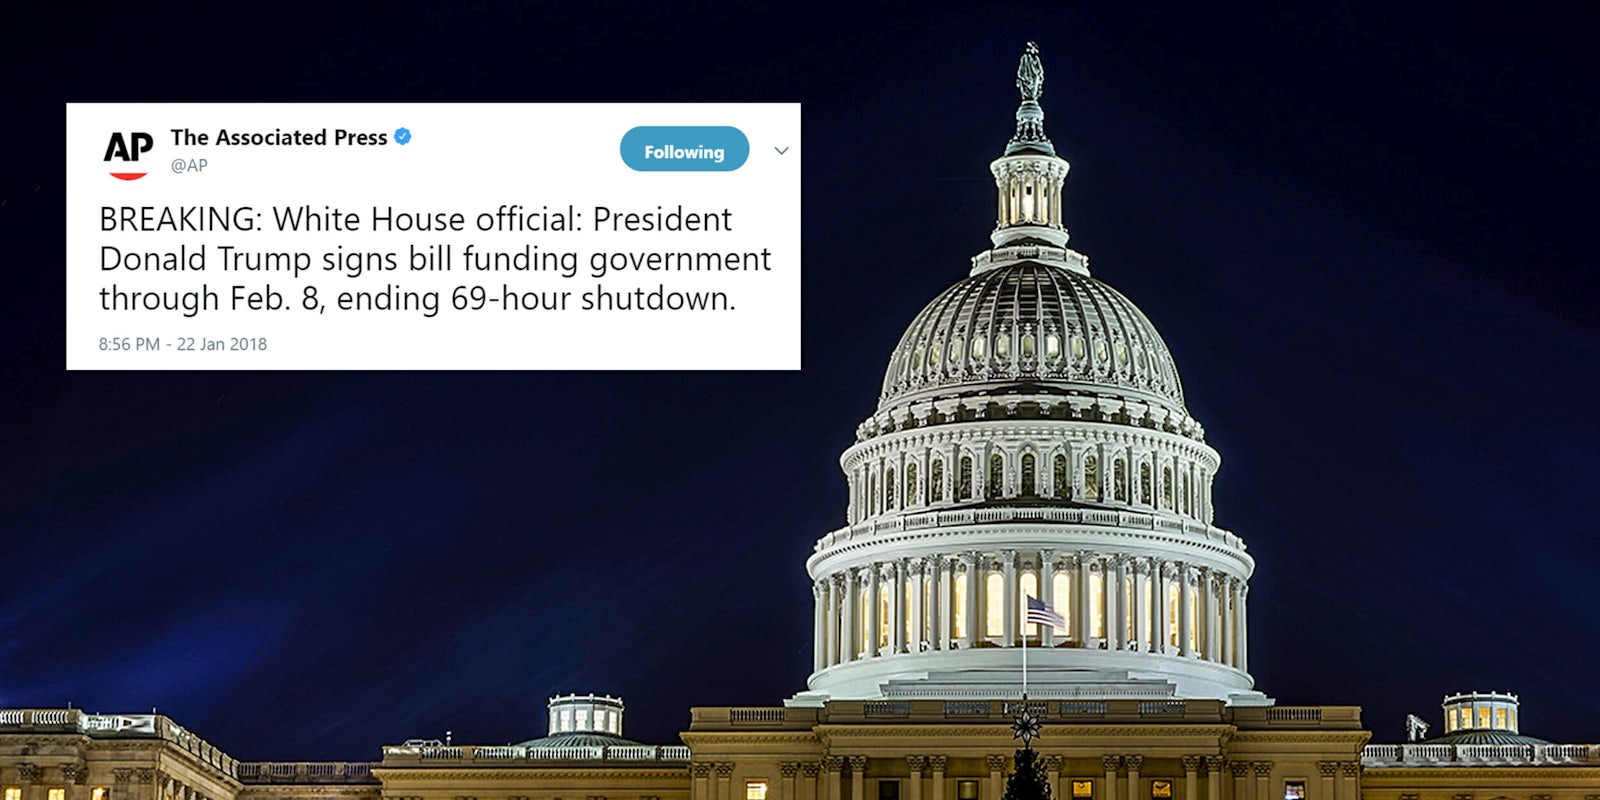 AP tweet announcing end of 69-hour government shutdown over US Capitol building - government shutdown 69 hours nice meme